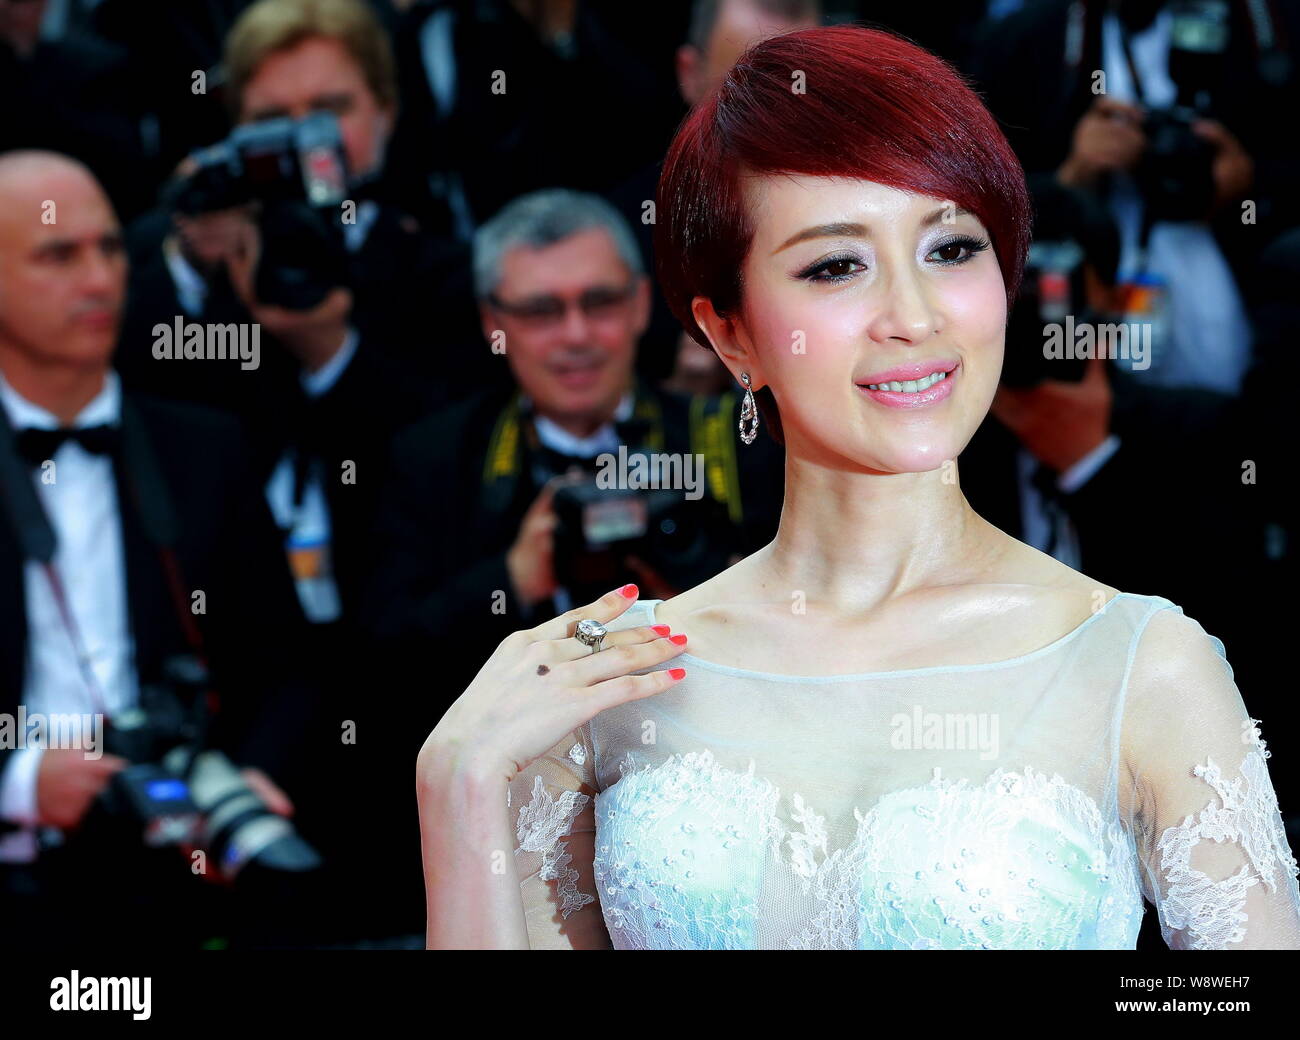 Chinese actress Jin Qiaoqiao poses as she arrives at the opening red carpet event of the 67th Cannes Film Festival in Cannes, France, 14 May 2014. Stock Photo